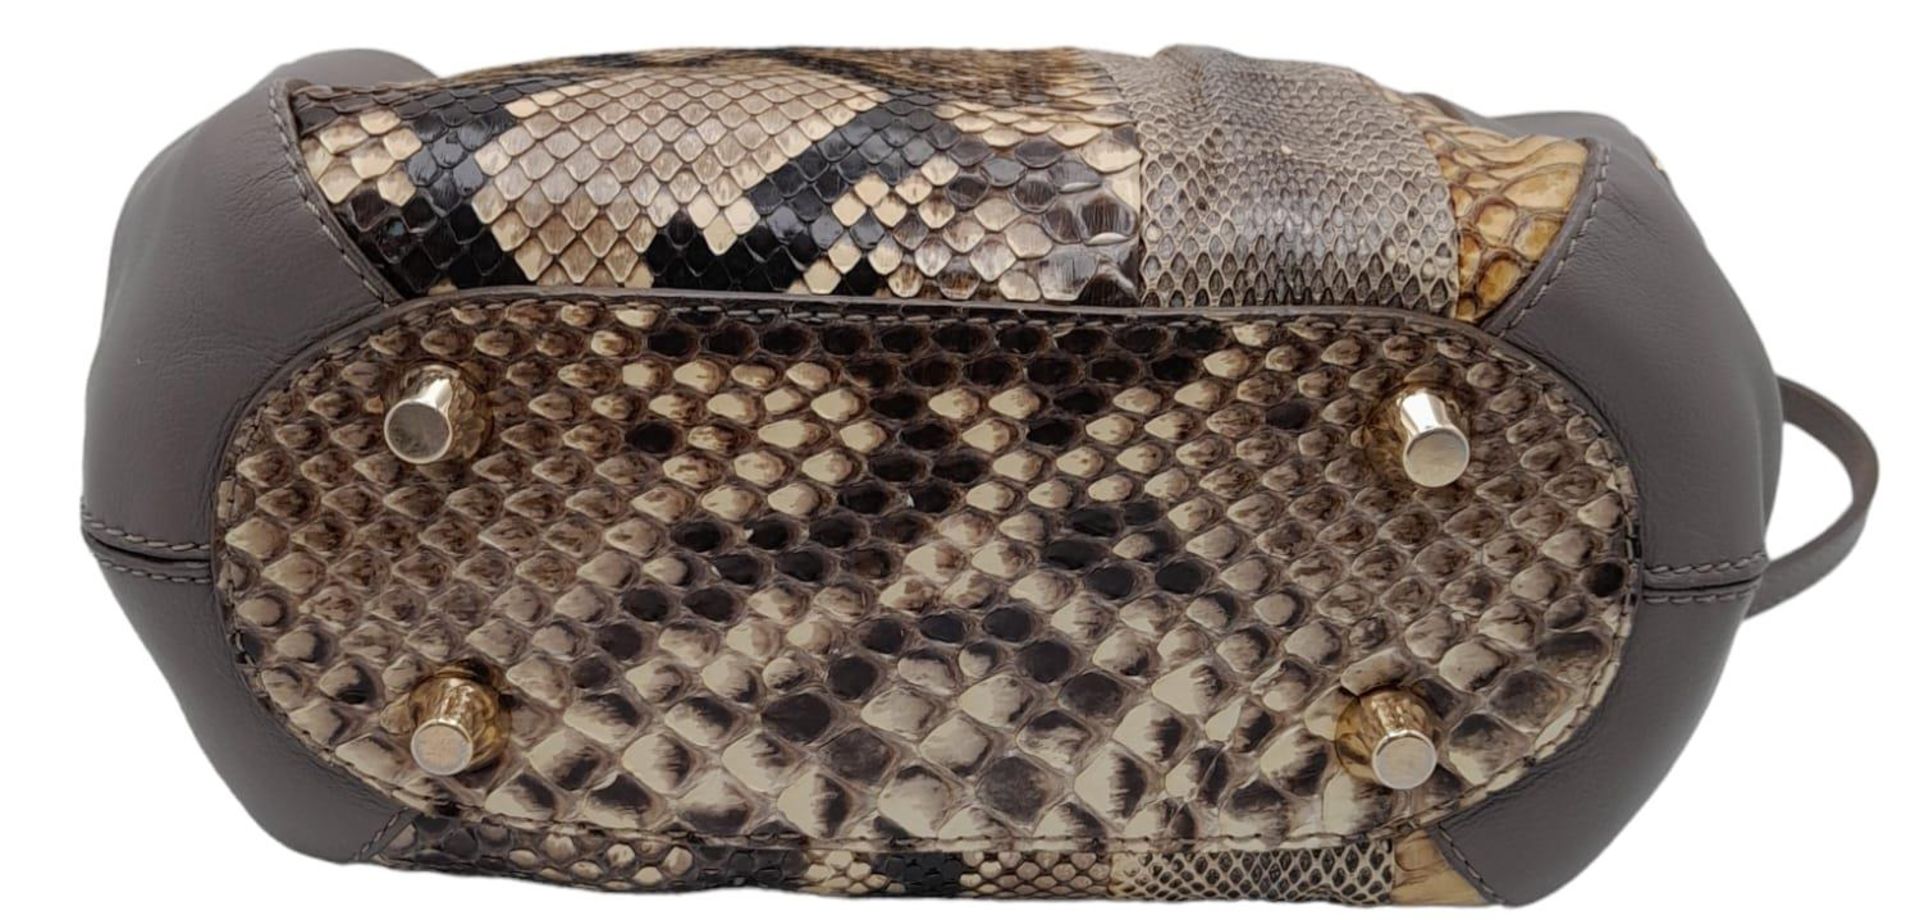 A Jimmy Choo Taupe Snakeskin Crossbody Bag. Snakeskin and leather exterior with gold-toned hardware, - Bild 4 aus 7